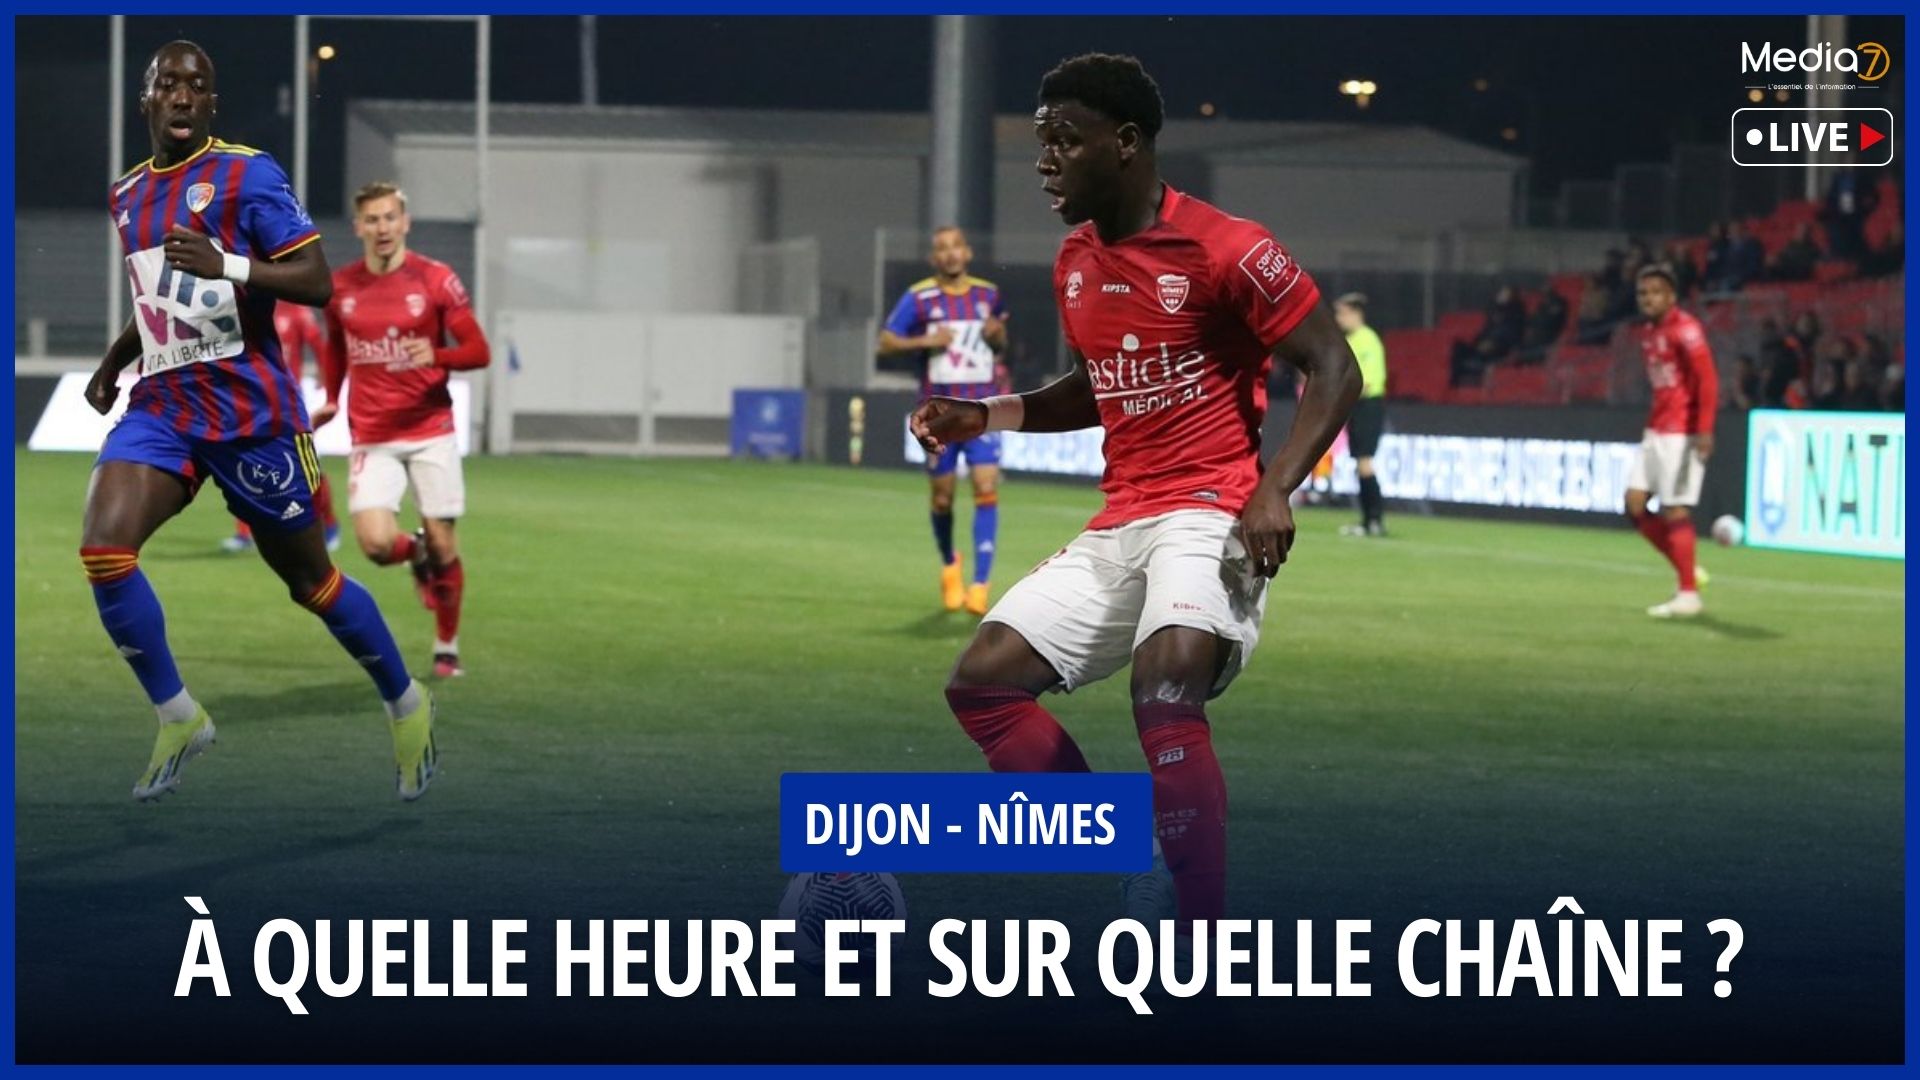 Dijon - Nîmes match live: TV channel and broadcast time - Media7